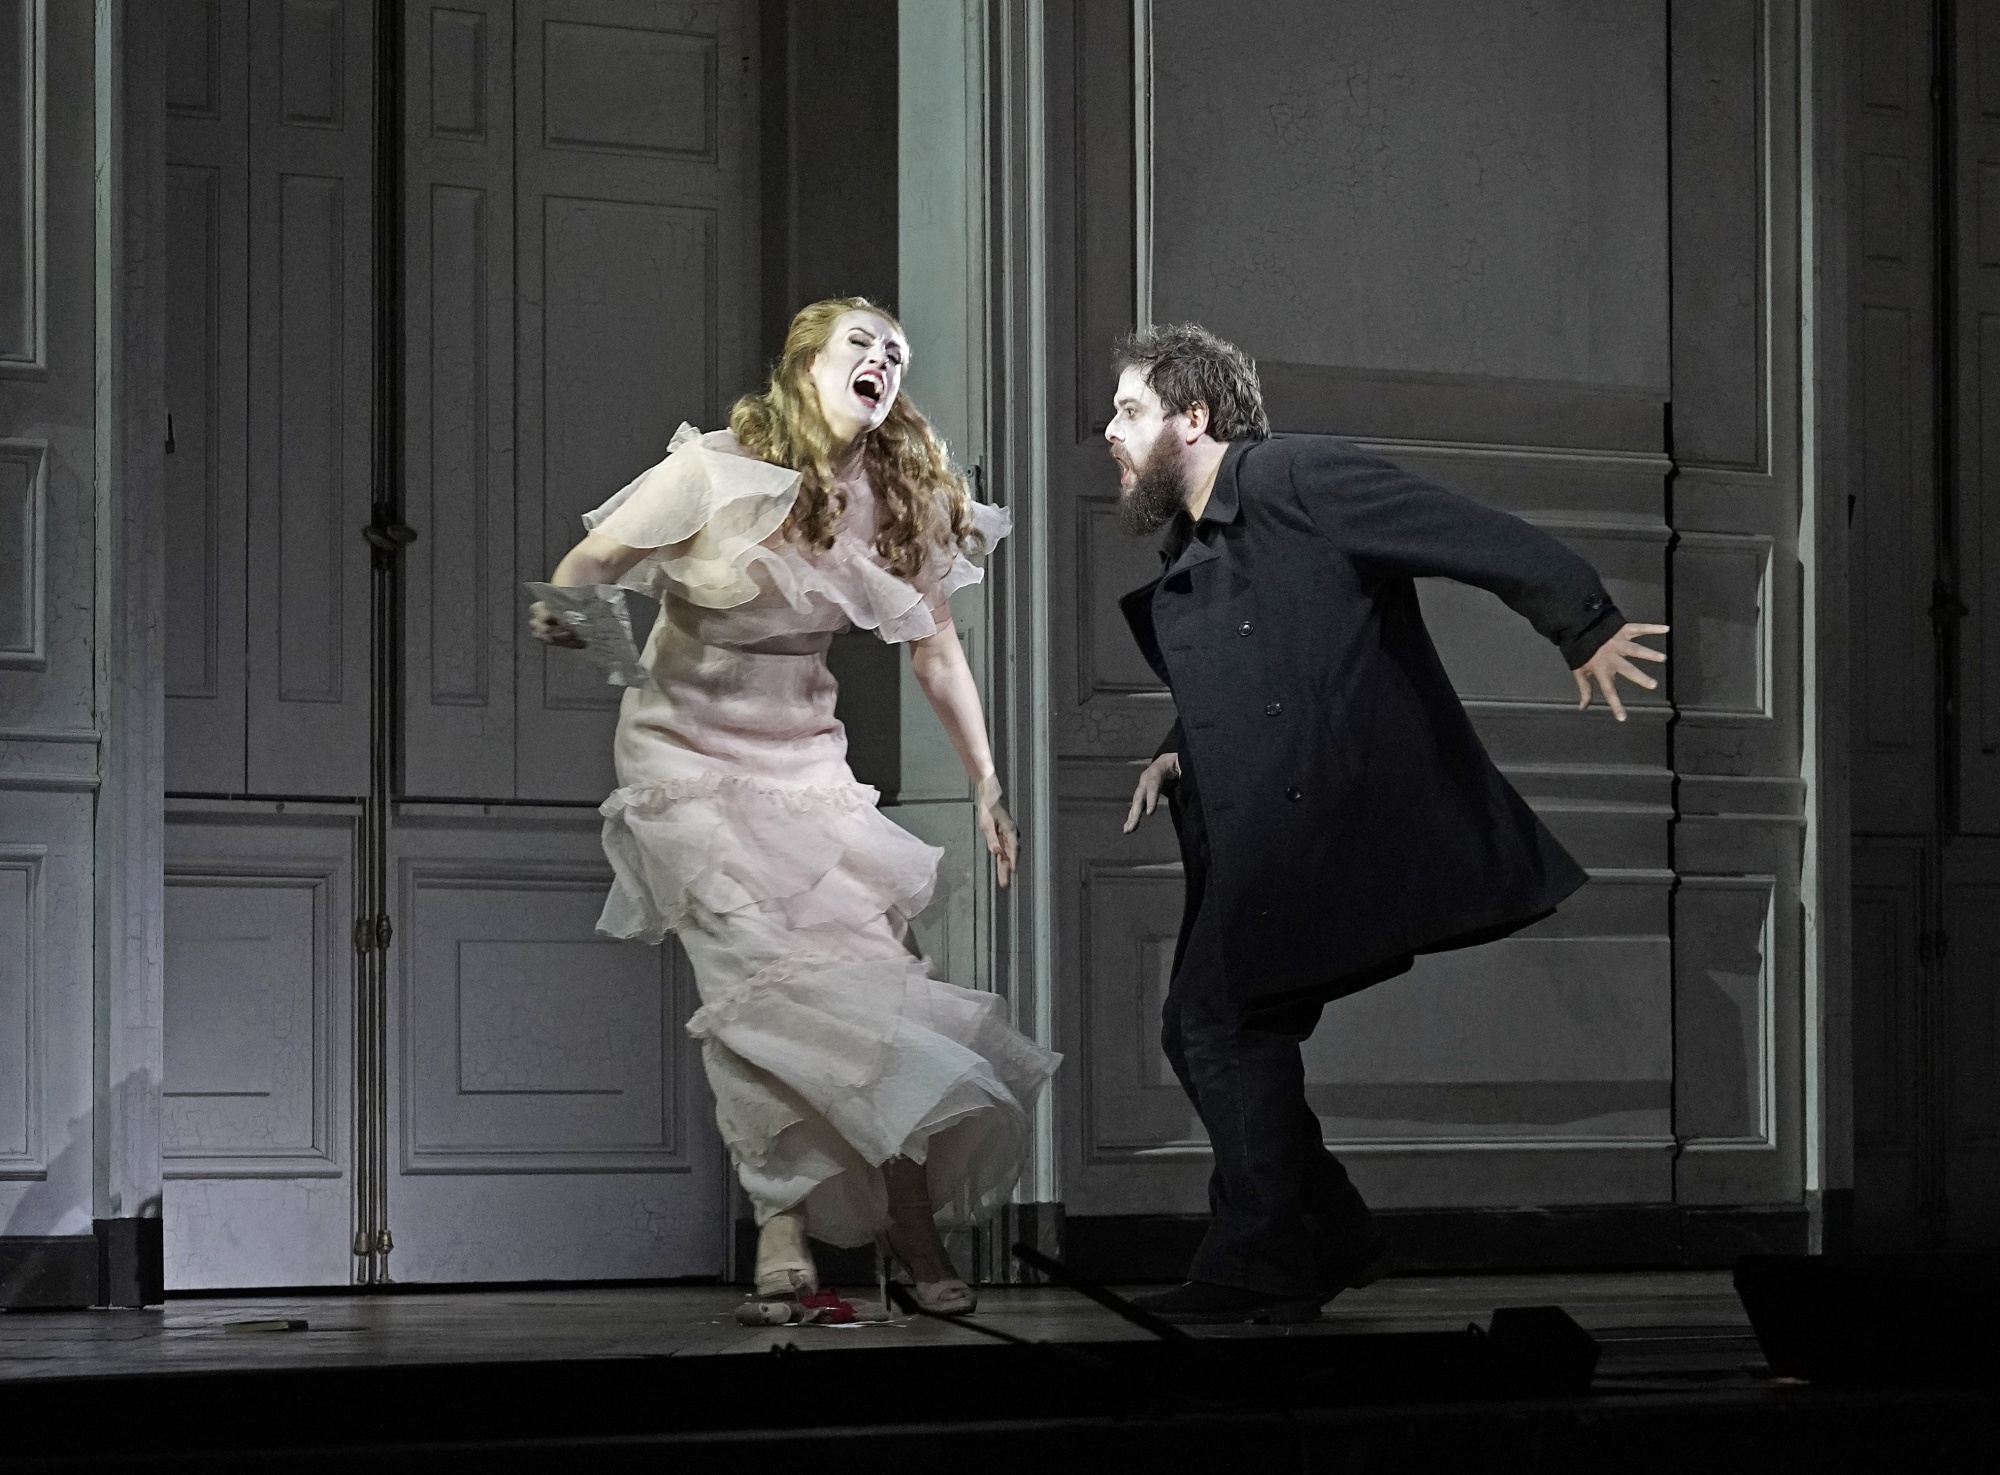 This image released by the Metropolitan Opera shows Brenda Rae as Ophelia, left, and Allan Clayton as Hamlet in the Metropolitan Opera's production of Matthew Jocelyn and Brett Dean's adaptation of Shakespeare's play &quot;Hamlet&quot; on May 4, 2022 in New York. (Karen Almond/Metropolitan Opera via AP)